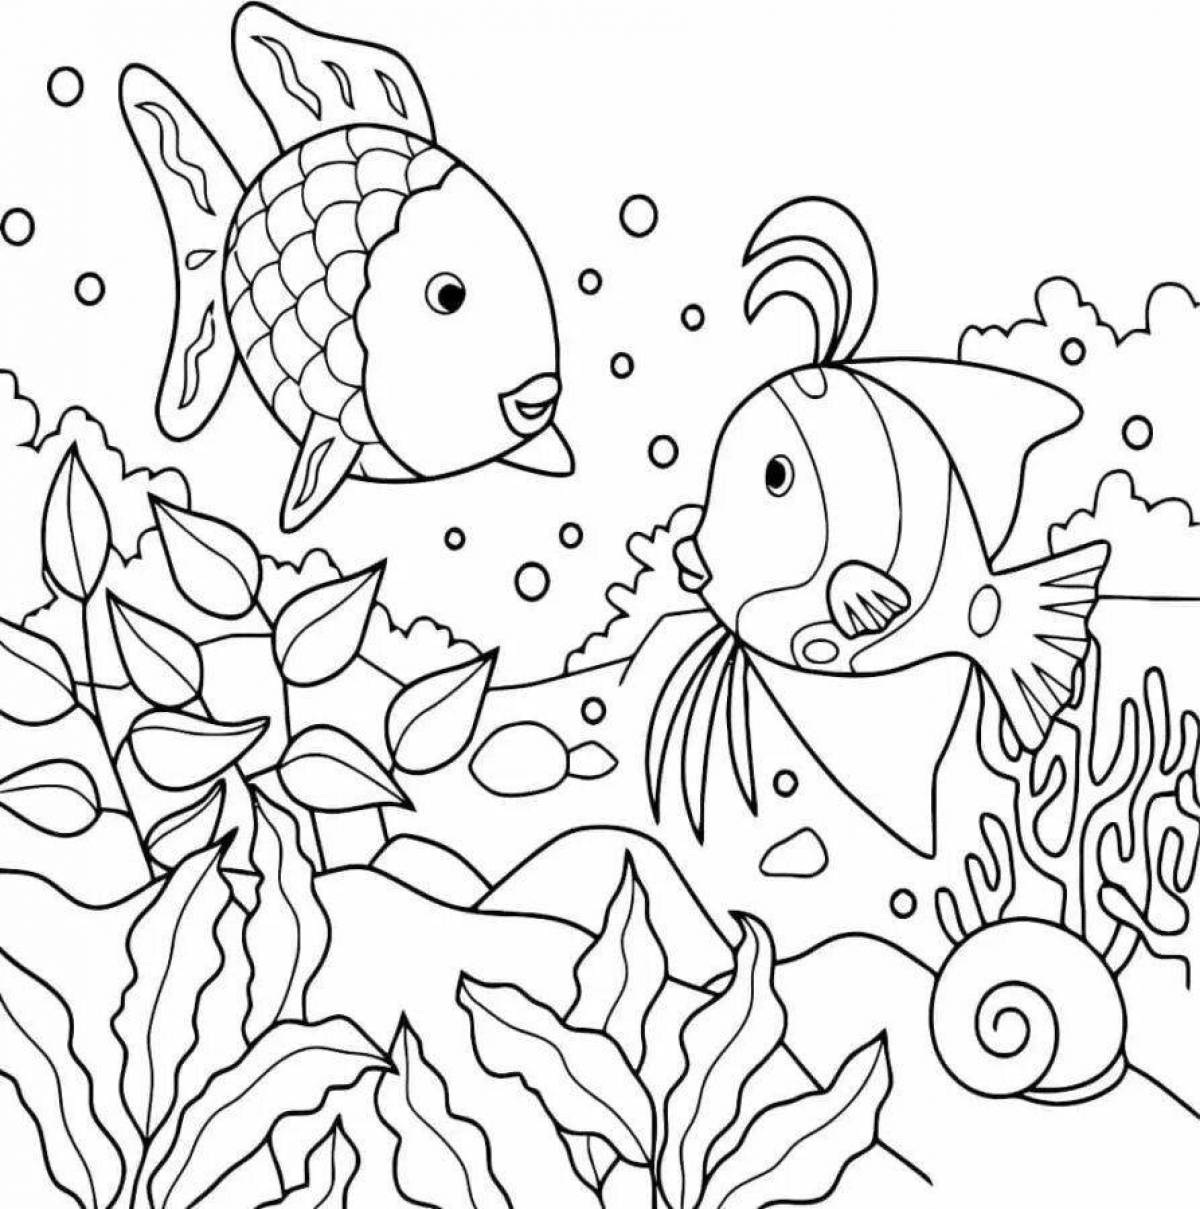 Exquisite coloring of the seabed for children